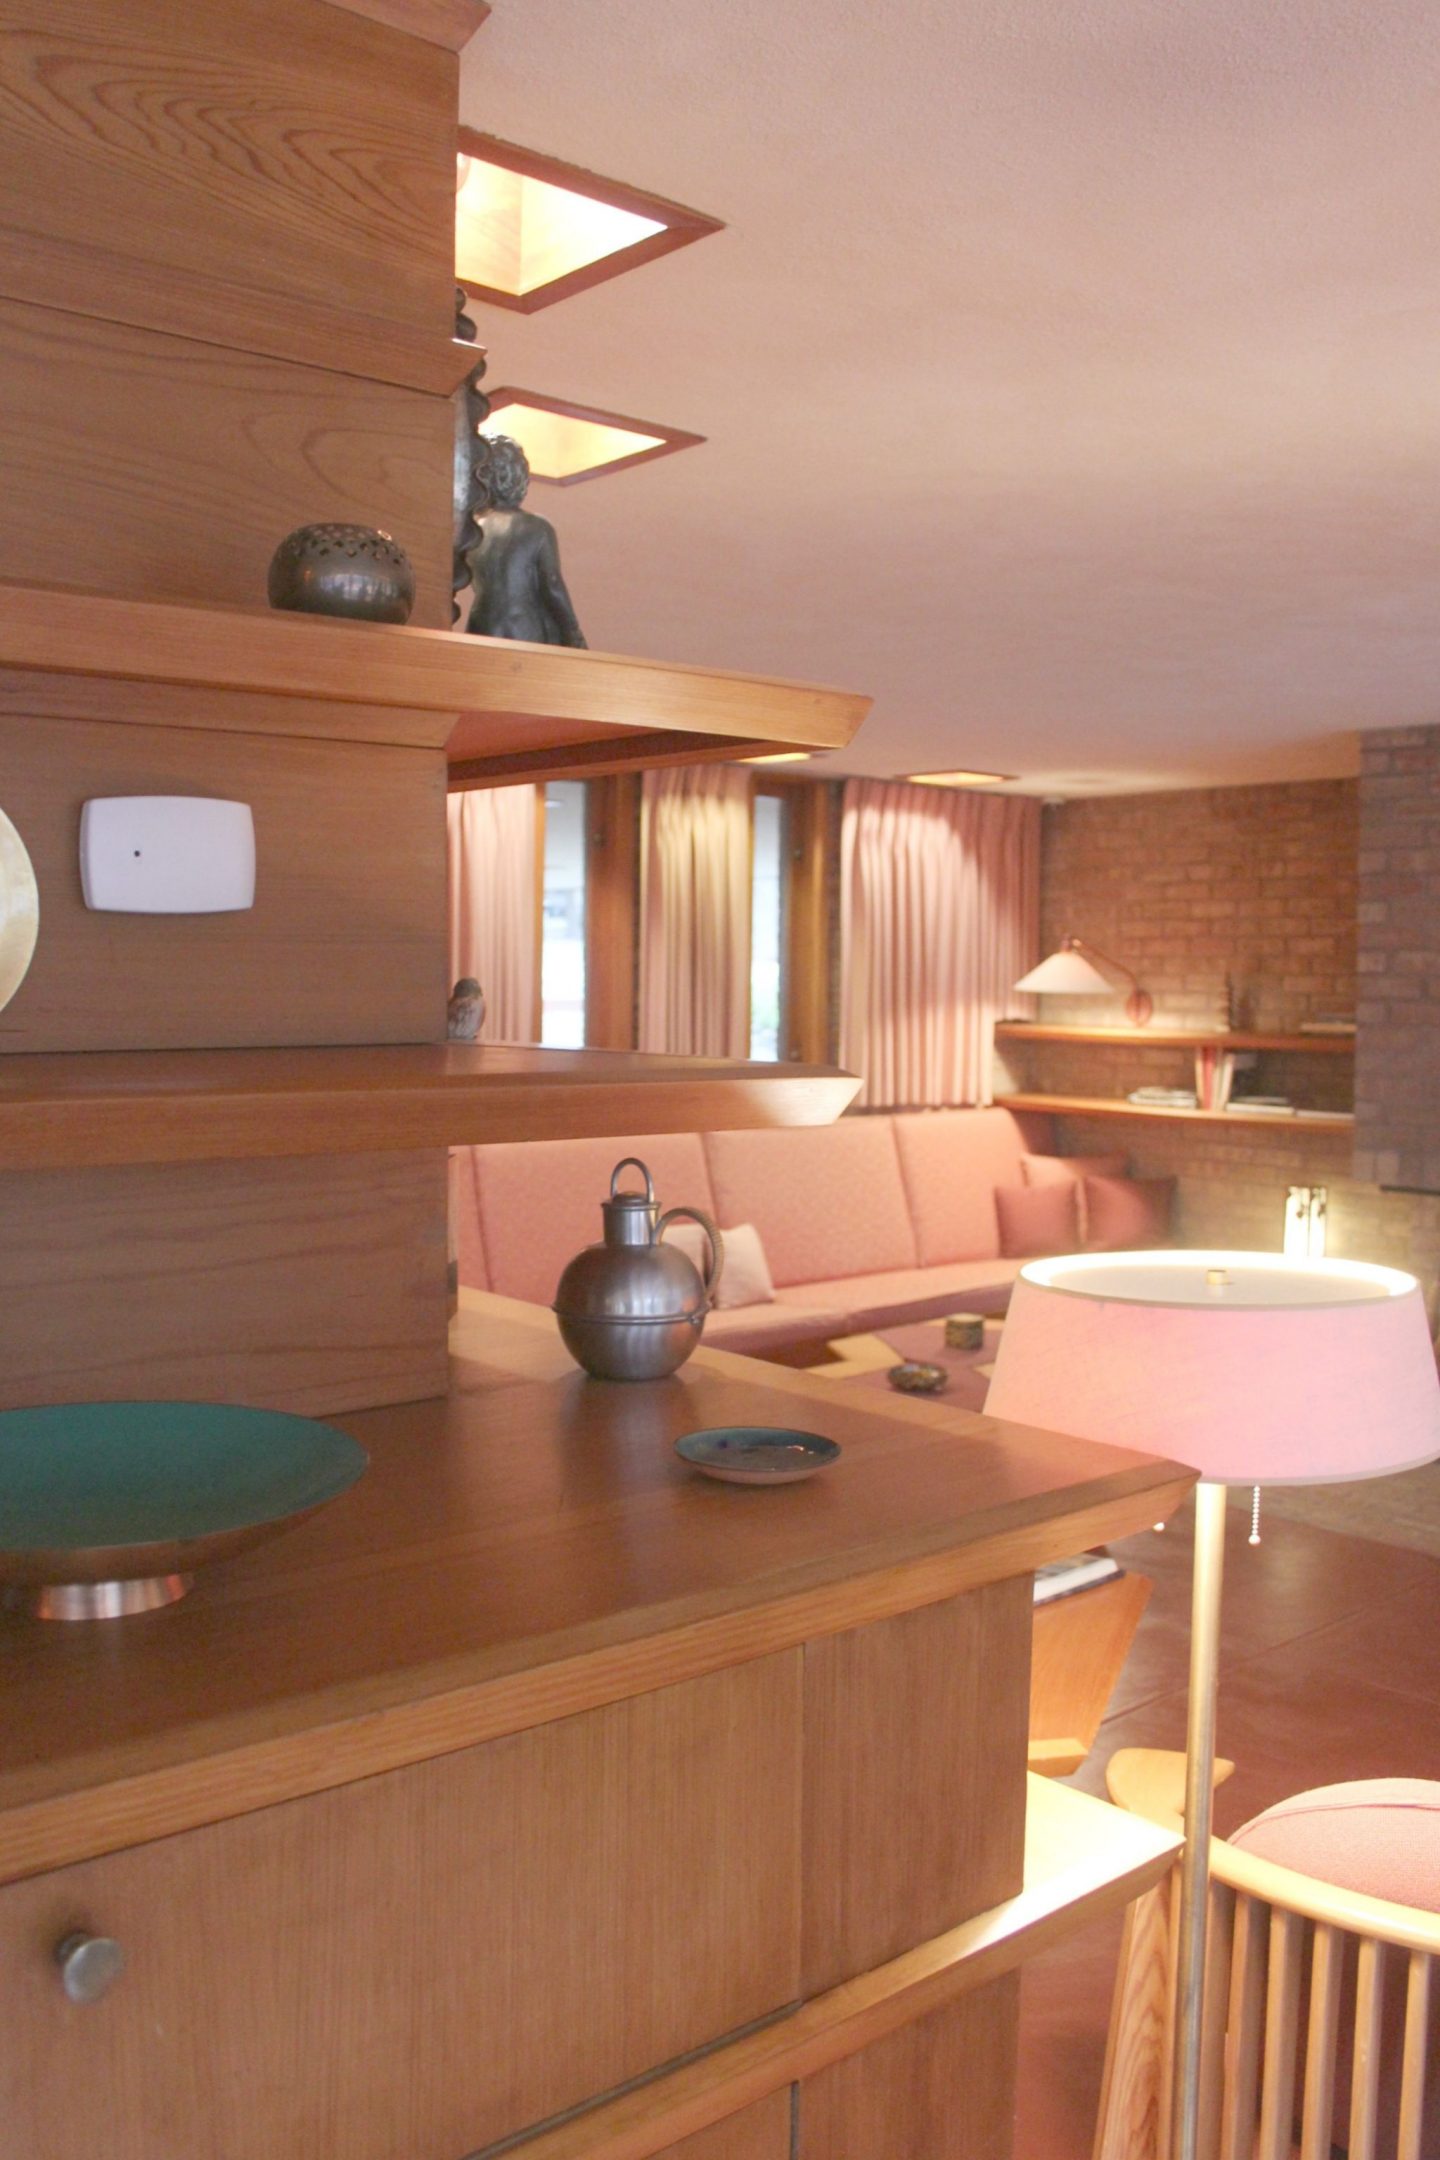 The Shining Jewel Within Frank Lloyd Wright's "Little Gem" {Laurent House}